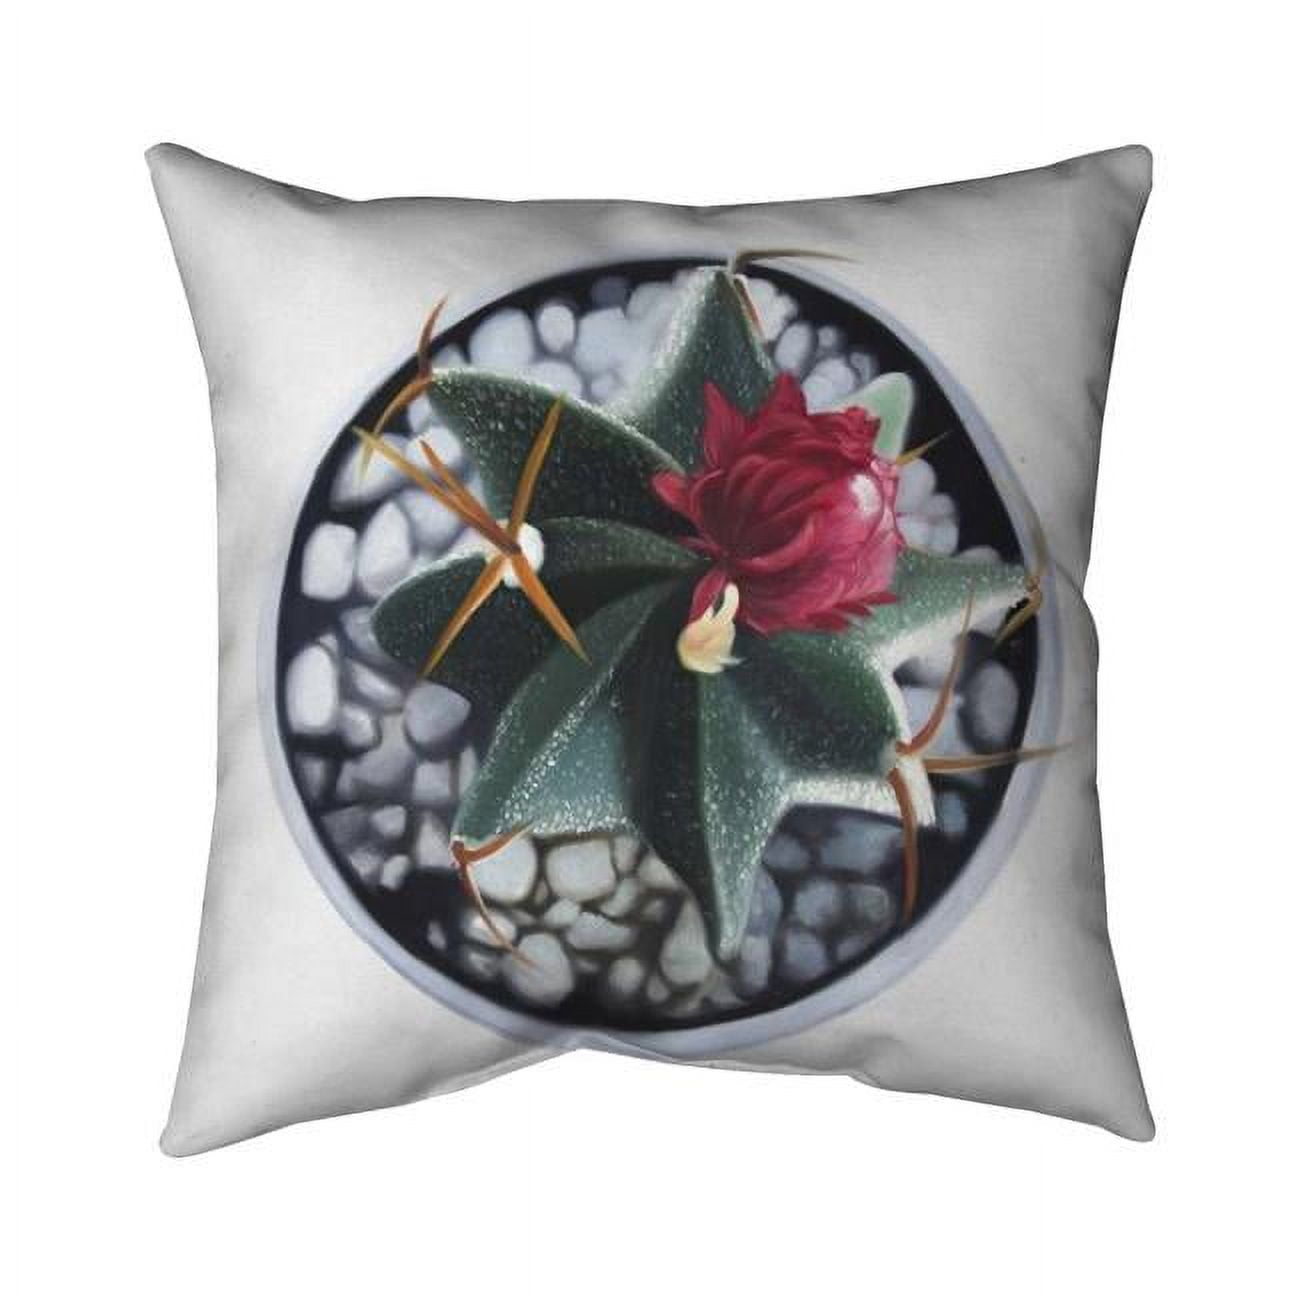 Begin Home Decor 5541-2020-FL327 20 x 20 in. Cactus In Pot-Double Sided Print Indoor Pillow